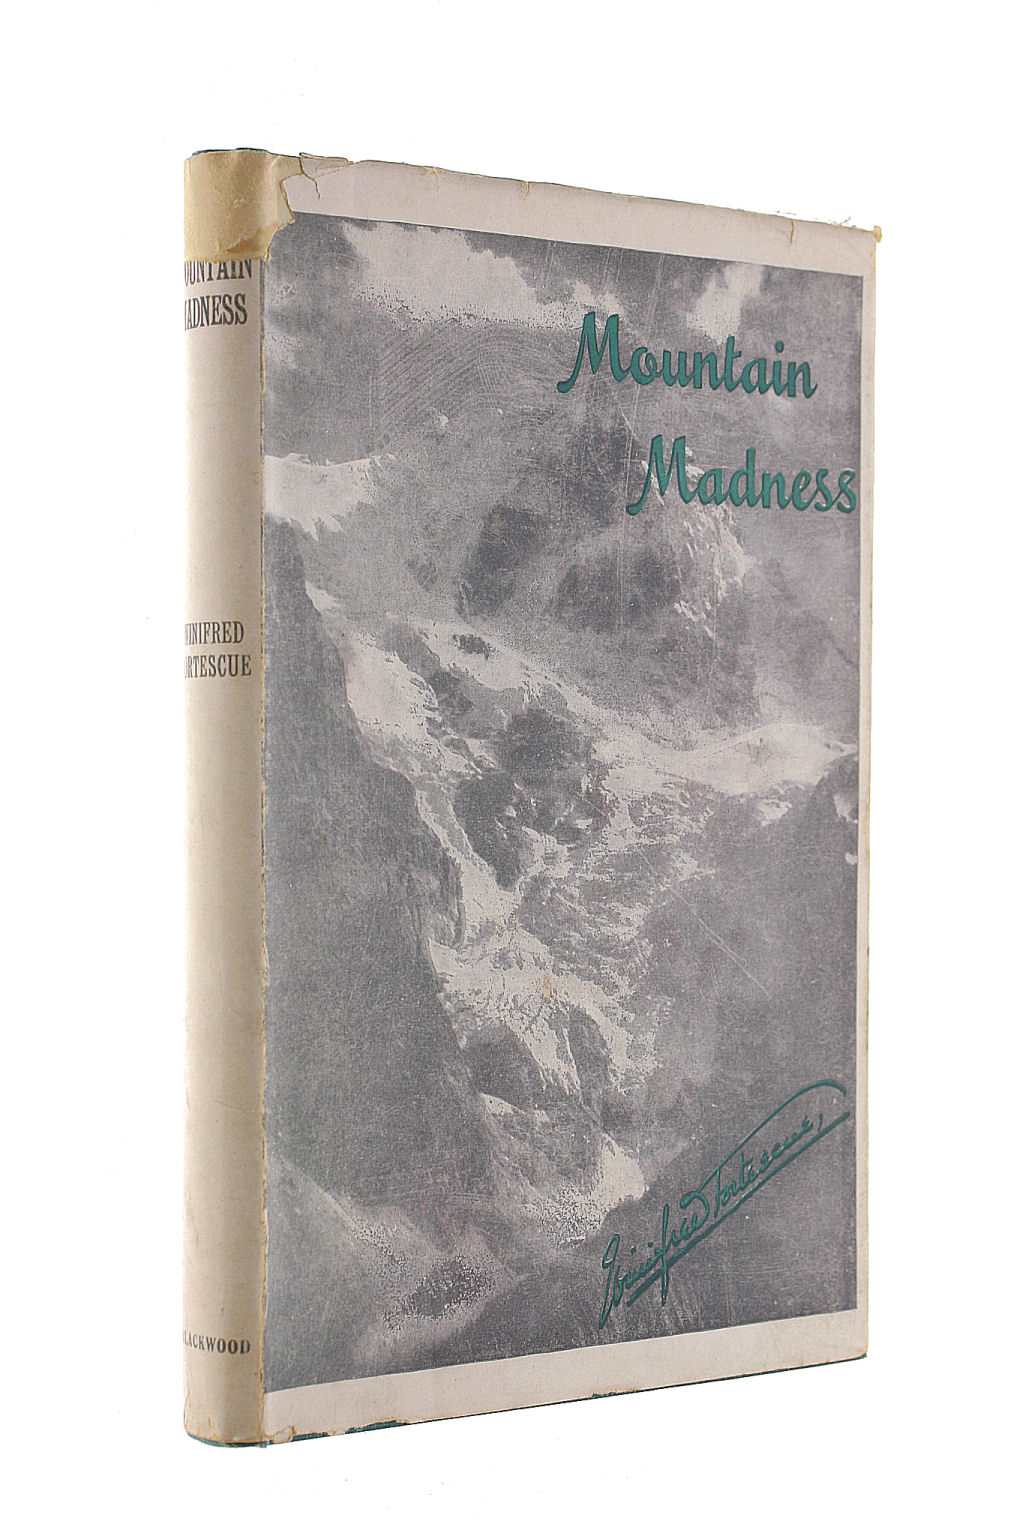 FORTESCUE,WINIFRED (LADY FORTESCUE) - Mountain Madness ... With Illustrations Including Portraits. An Account Of Holidays Spent In The French Alps